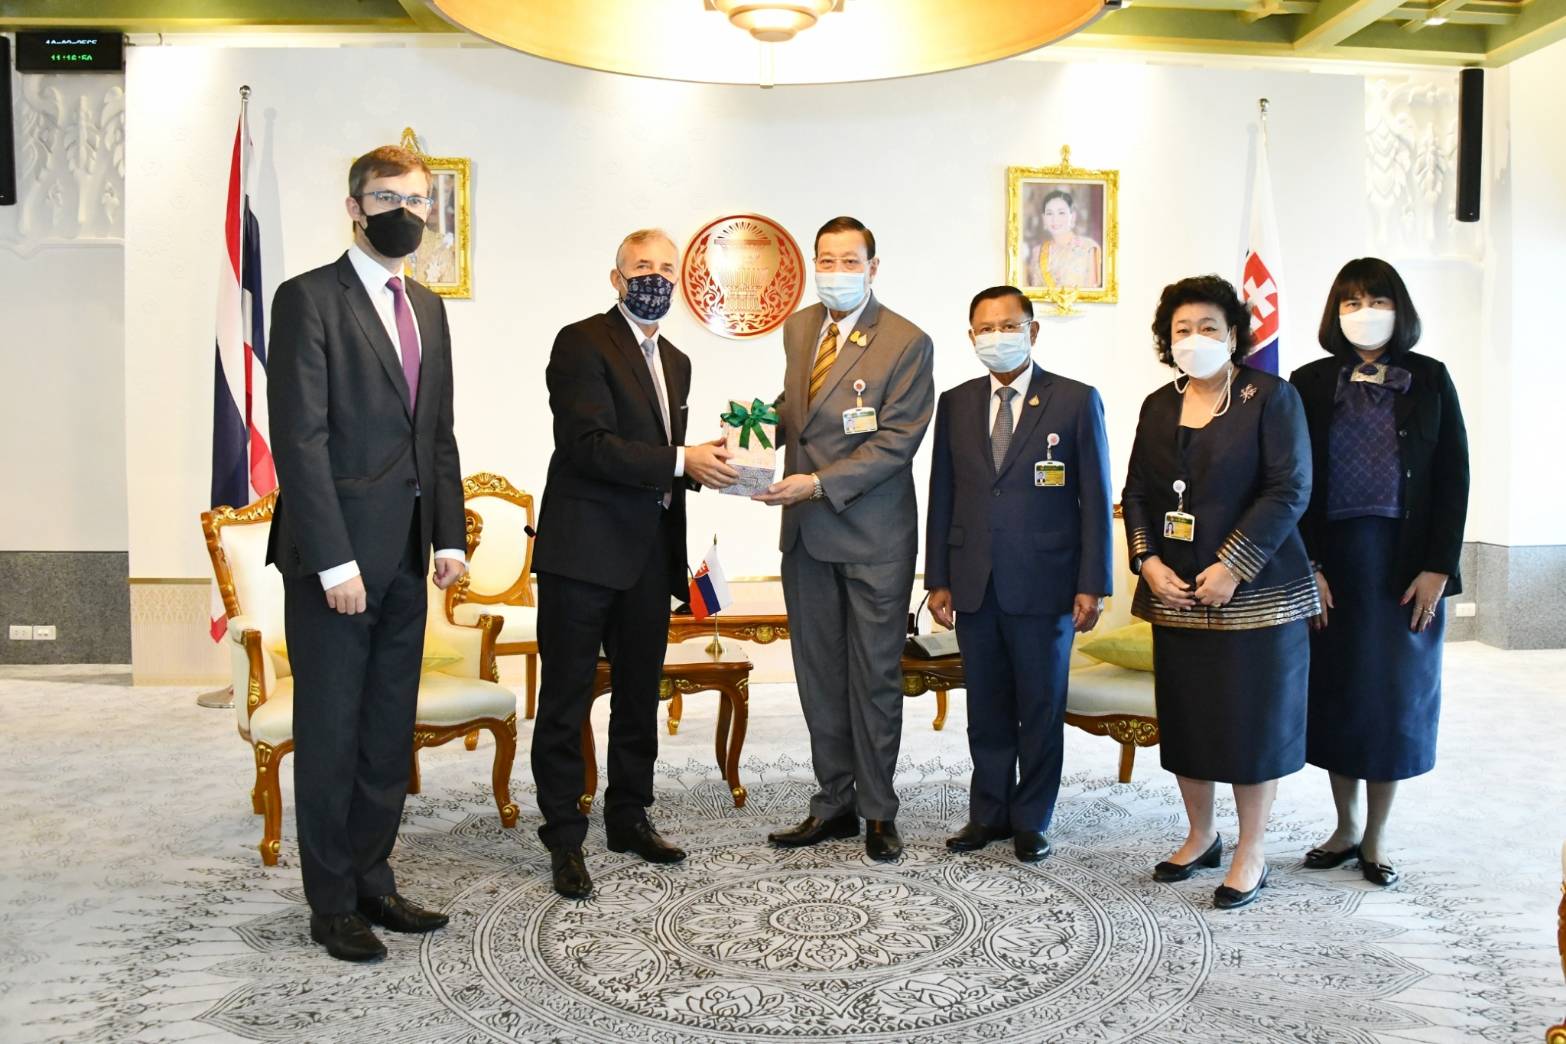 Prof. Propetch Wichitcholchai, President of the Senate, Welcomed H.E. Mr. Jaroslav Auxt, Ambassador of the Slovak Republic to the Kingdom of Thailand